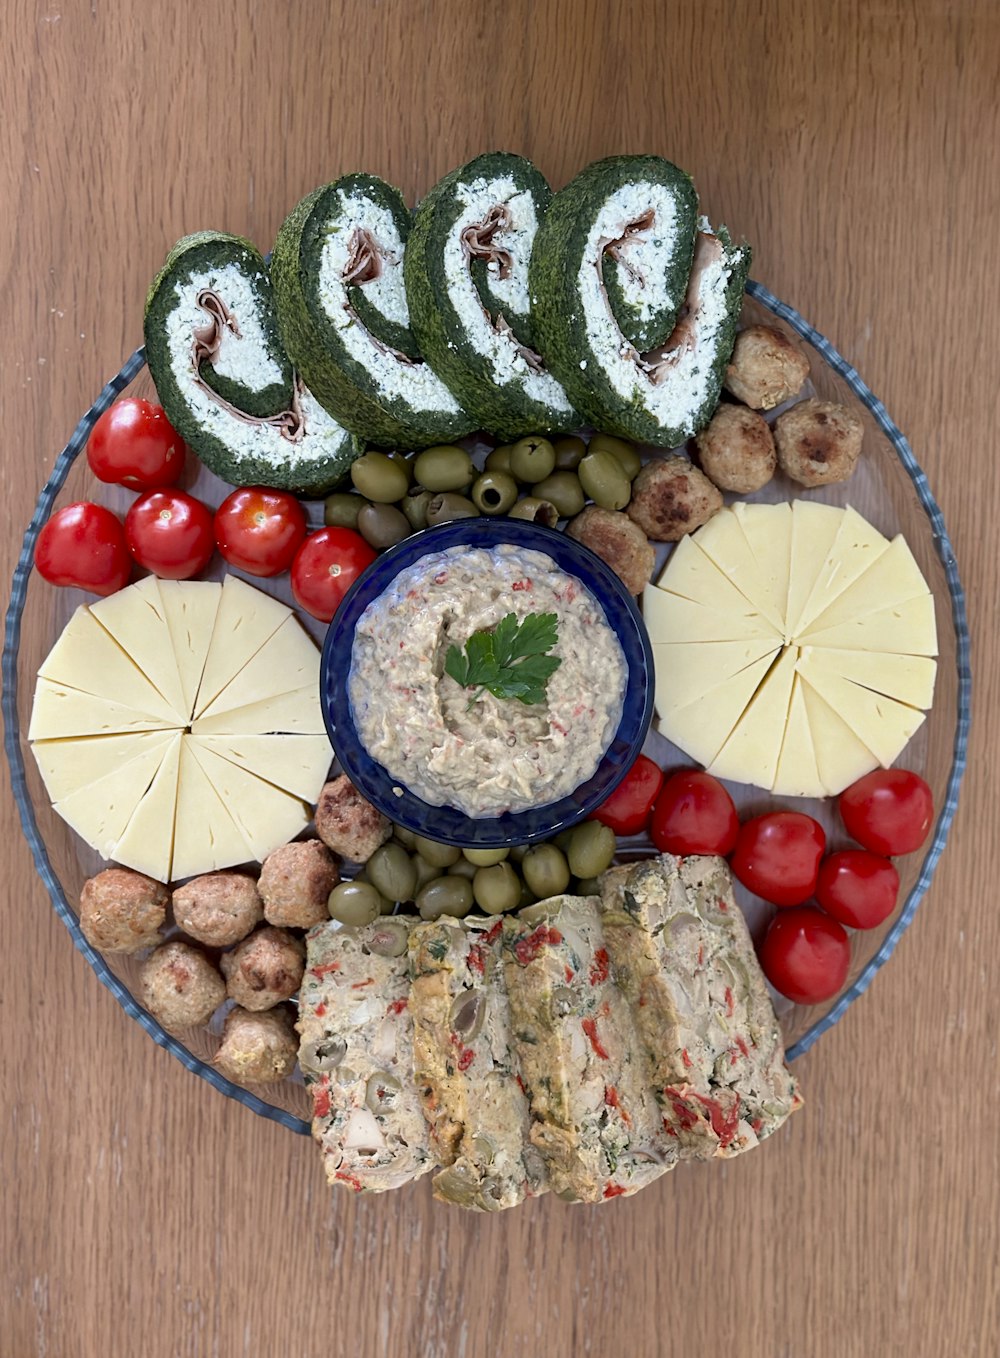 a plate of food that includes crackers, olives, tomatoes, and other